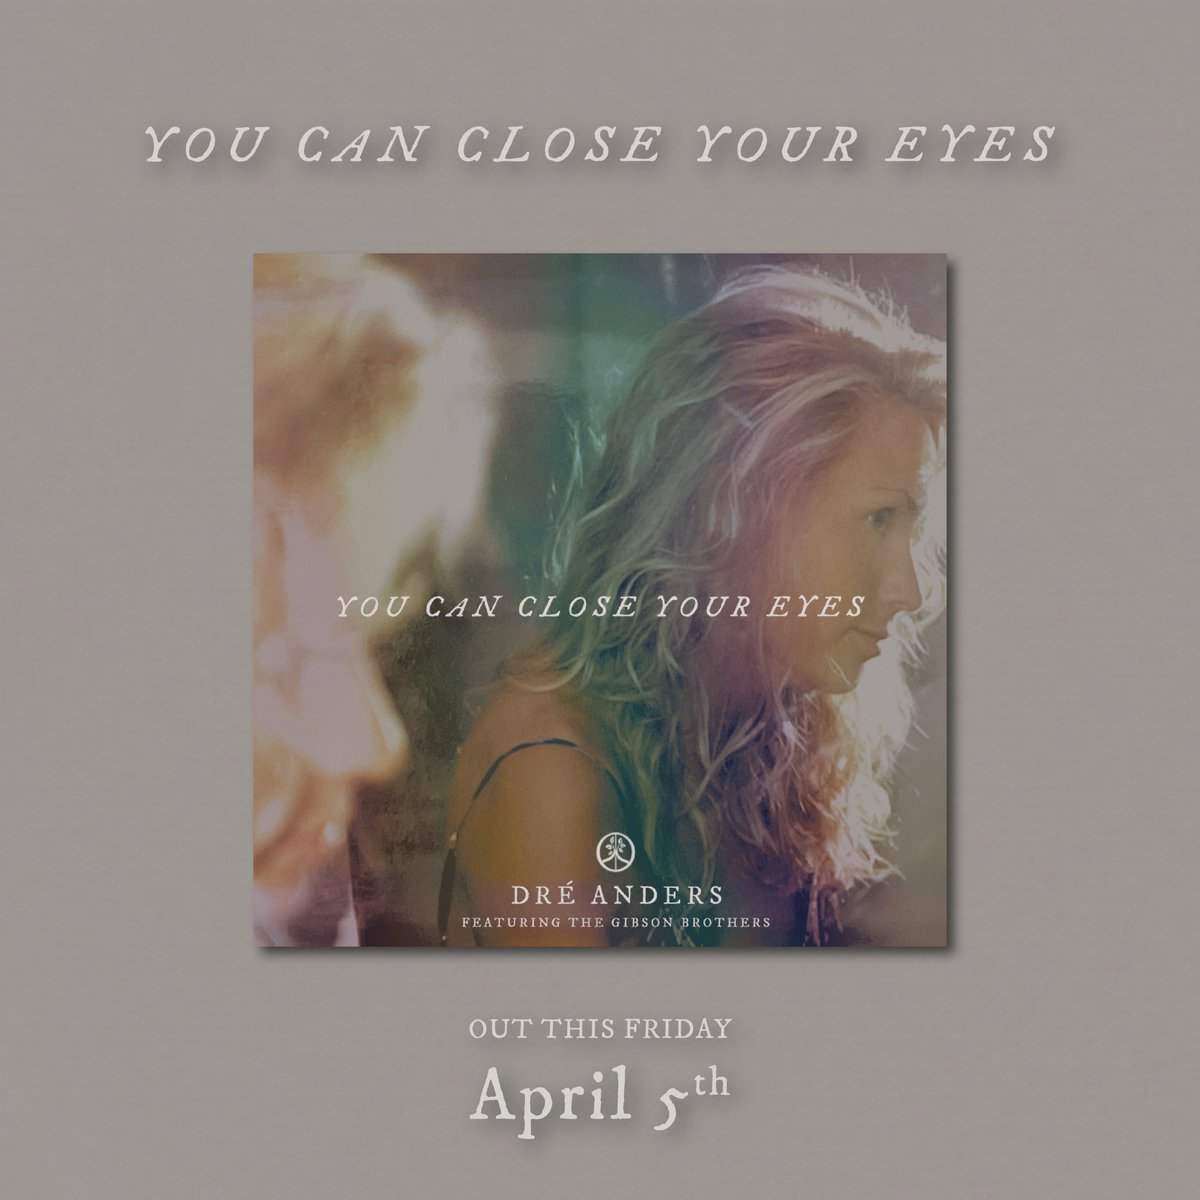 ✨The countdown has started! “You Can Close Your Eyes” out this Friday, April 5th!
.
#youcancloseyoureyes
#dreanders
#dreandersmusic
#JamesTaylorCover
#AcousticMusic